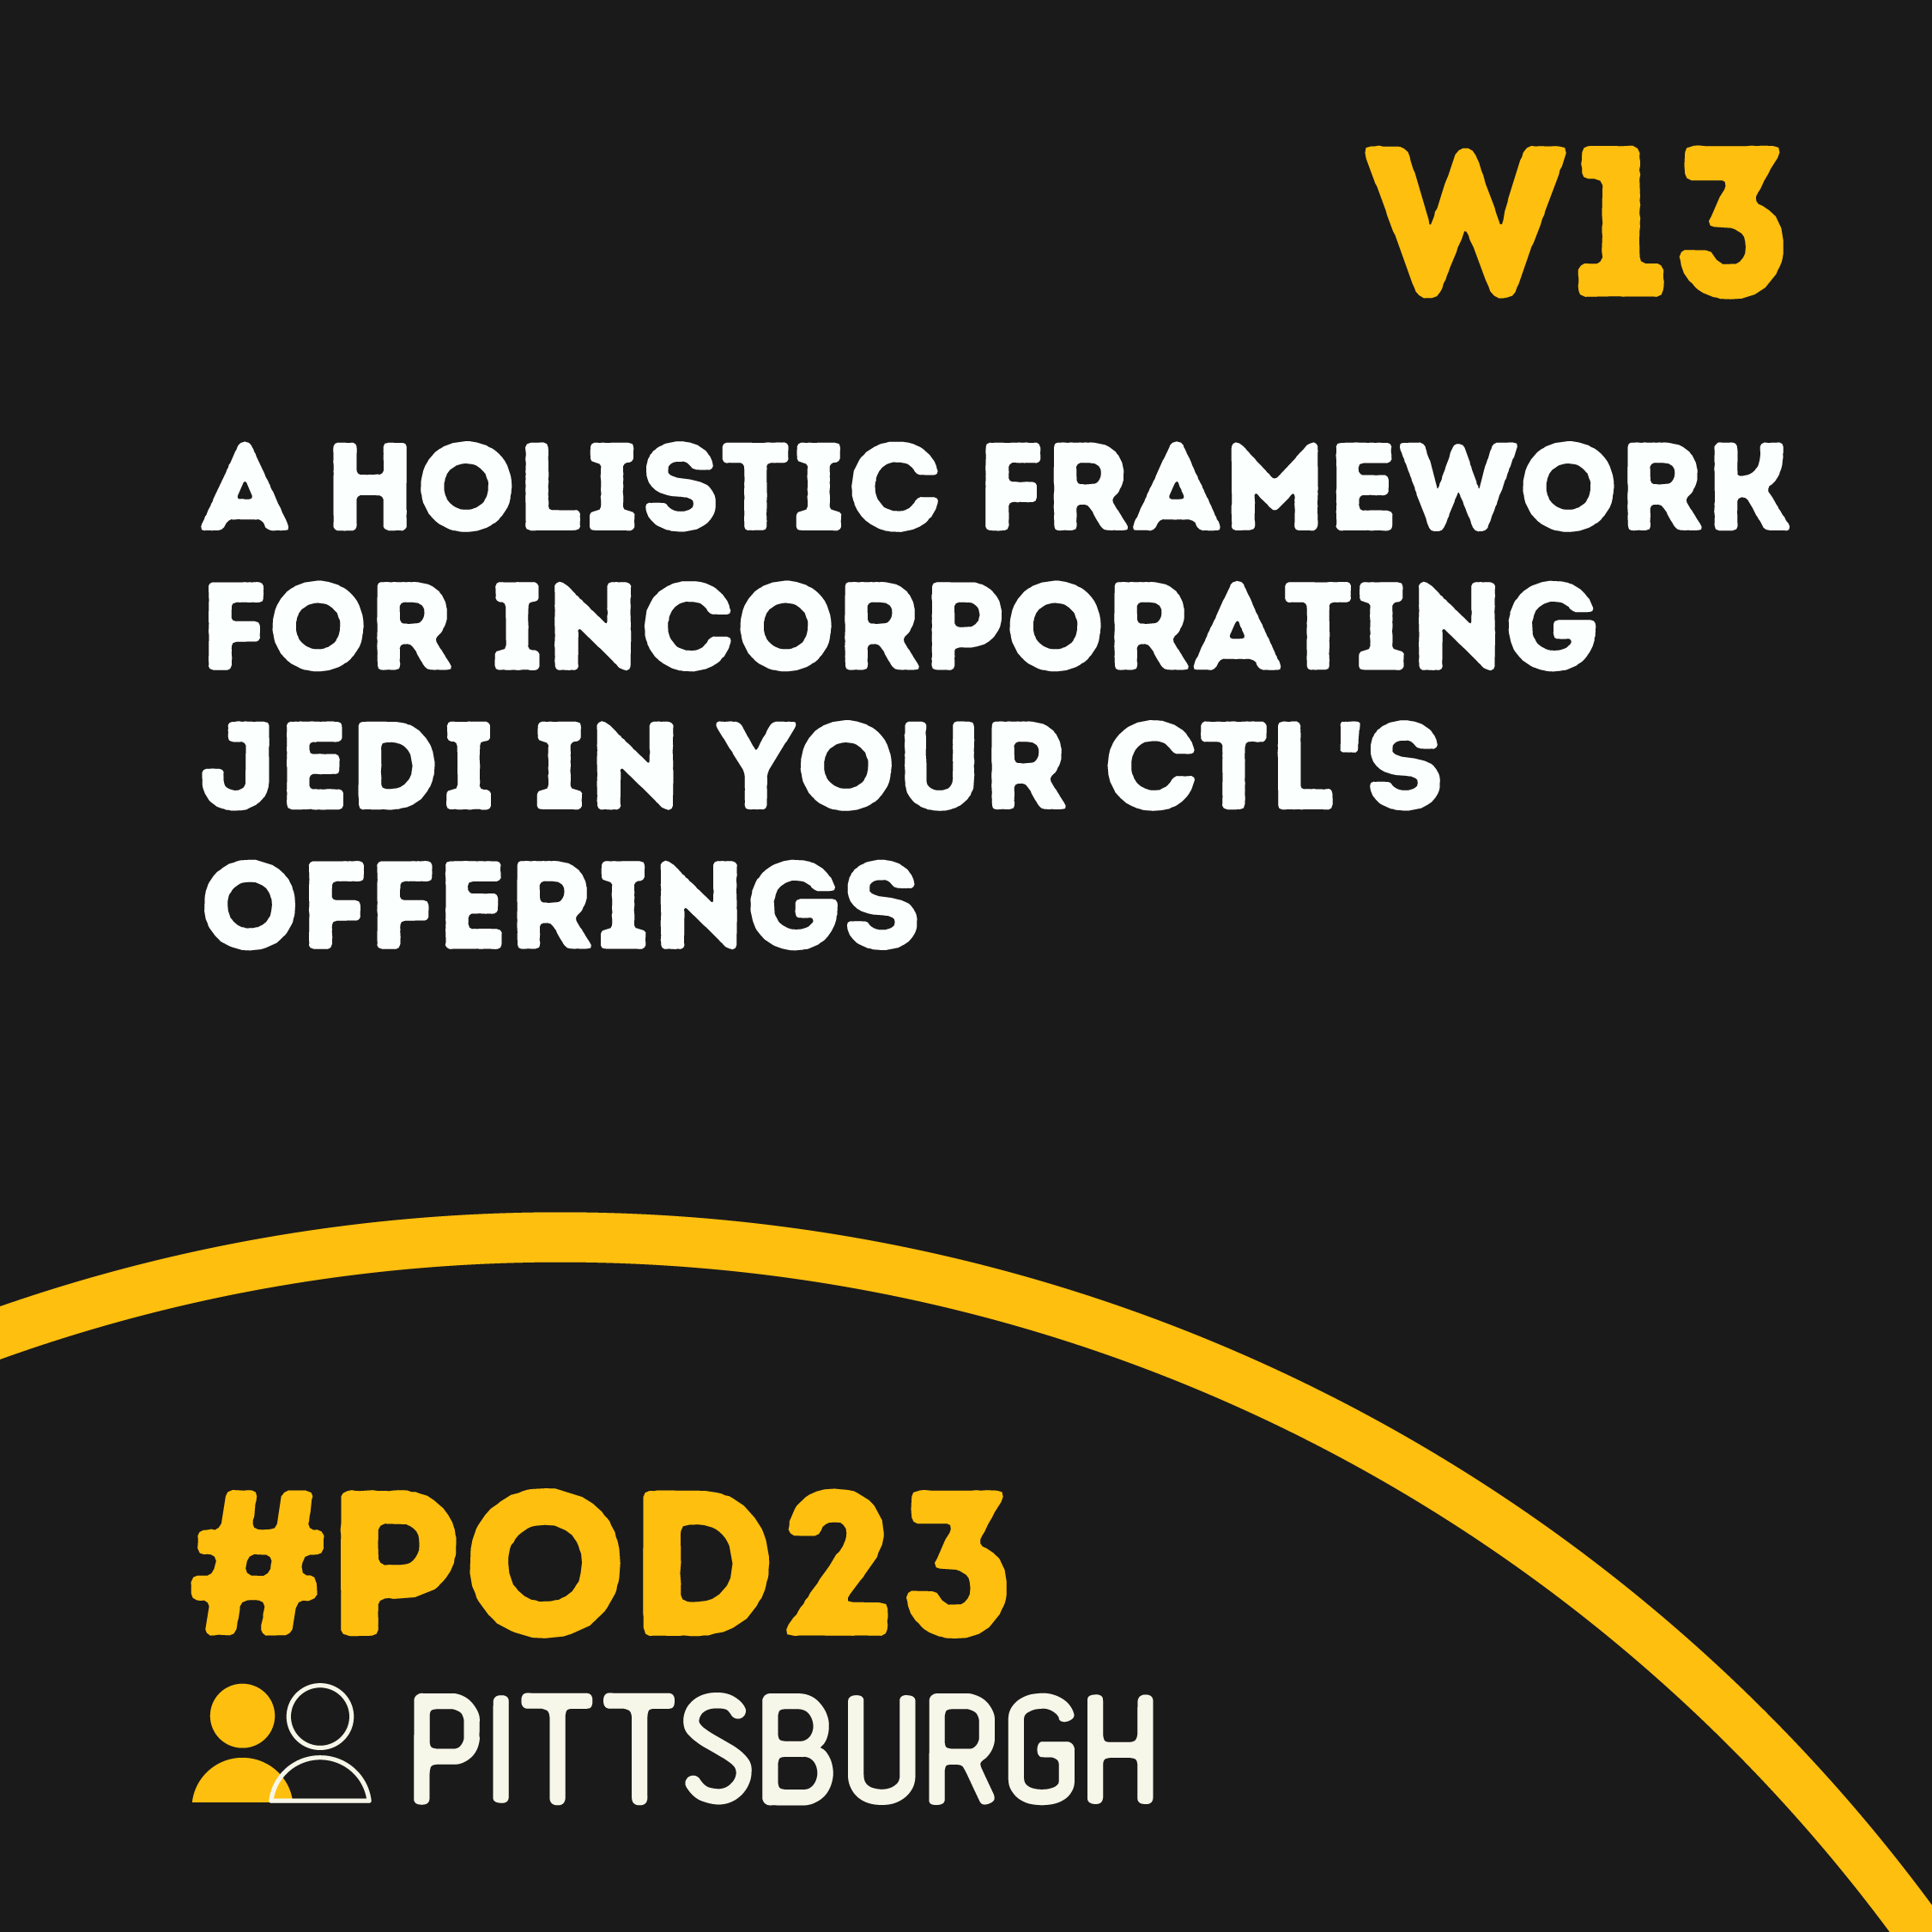 #POD23 W13: A Holistic Framework for Incorporating JEDI in Your CTL's Offerings